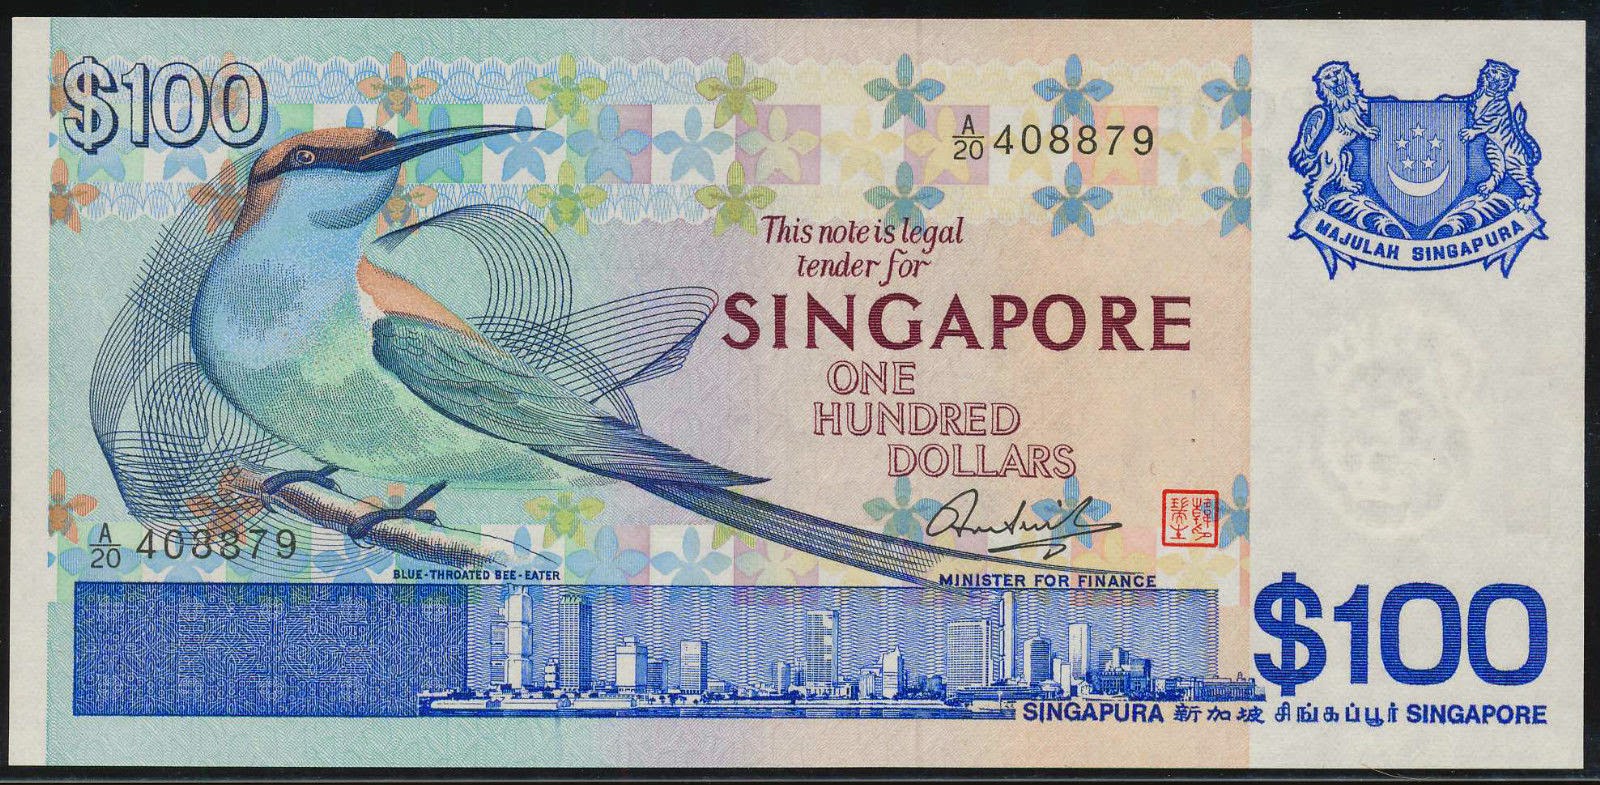 Singapore currency notes 100 Dollars banknote Bird Series